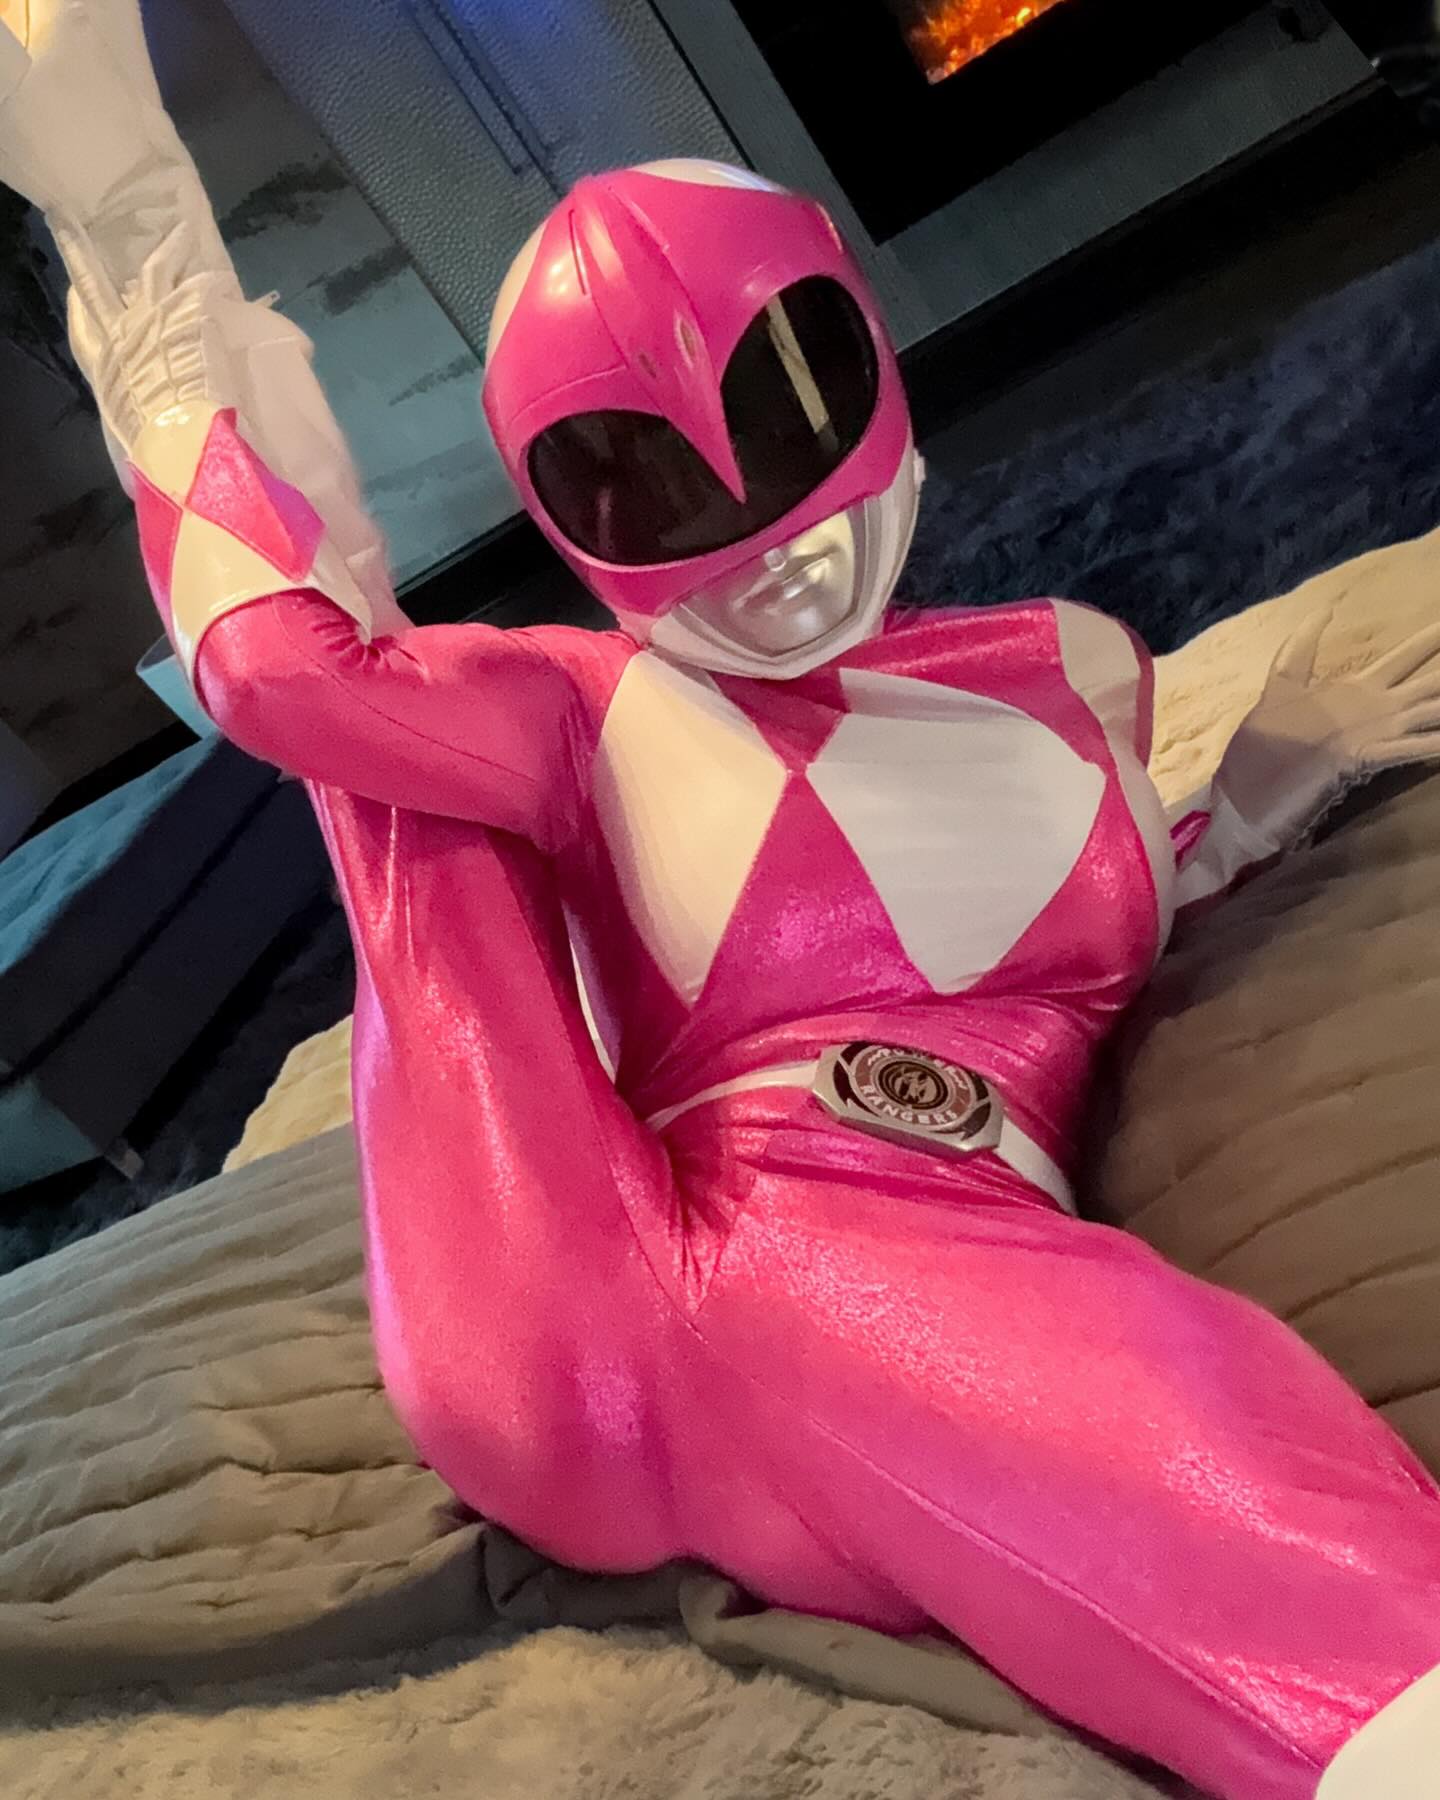 When he asks me to wear something cute for him.
💗
😏
#powerrangers #pinkranger #cosplay